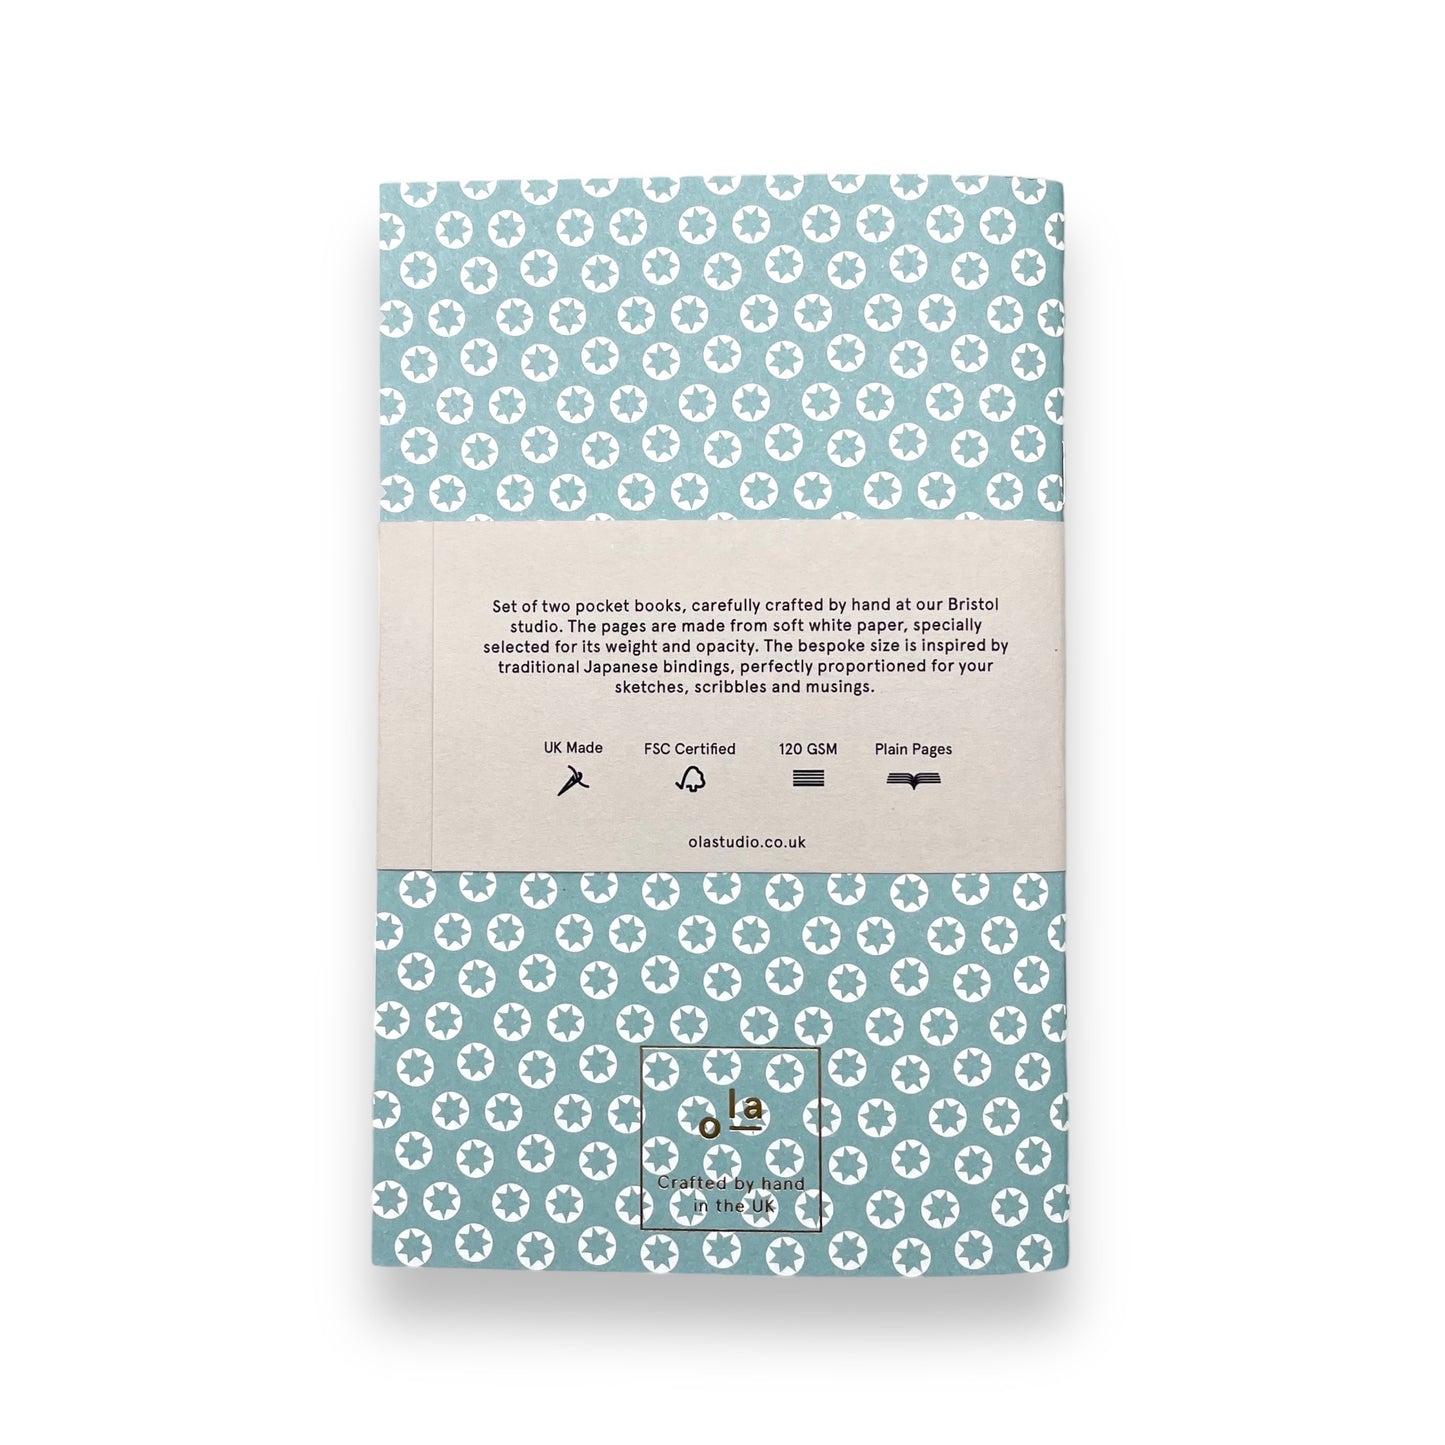 A set of two pocket notebooks by Ola Studio. One cover has a geometric green and aqua wave pattern and the other cover has little white stars on an aqua backdrop. Reverse of the packaging